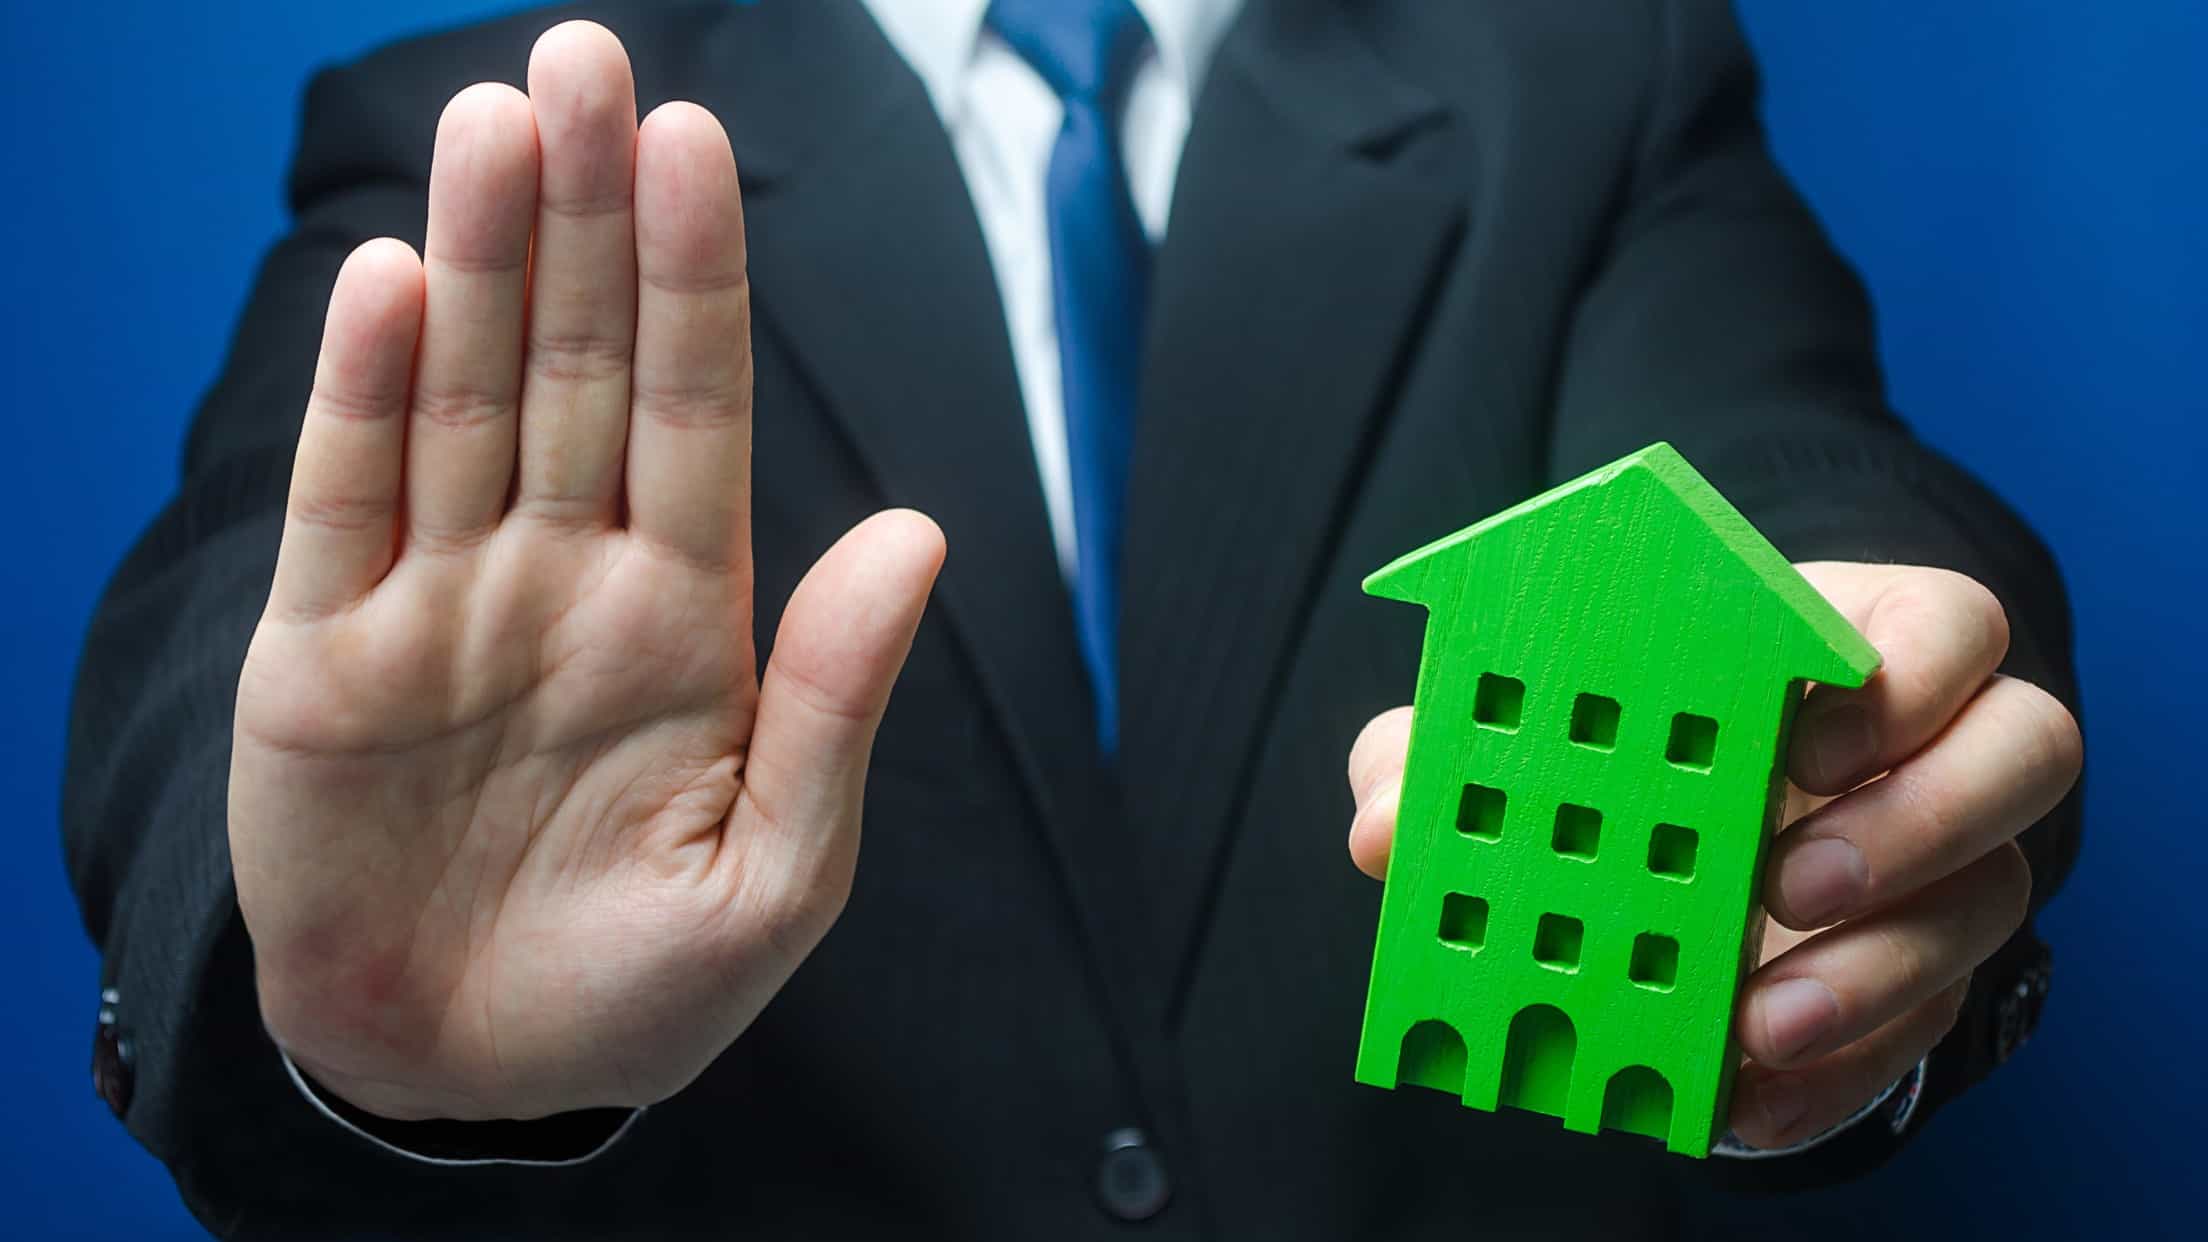 real estate investment trust trading halt represented by man holding hand up in stop motion and holding wooden block in the shape of a house